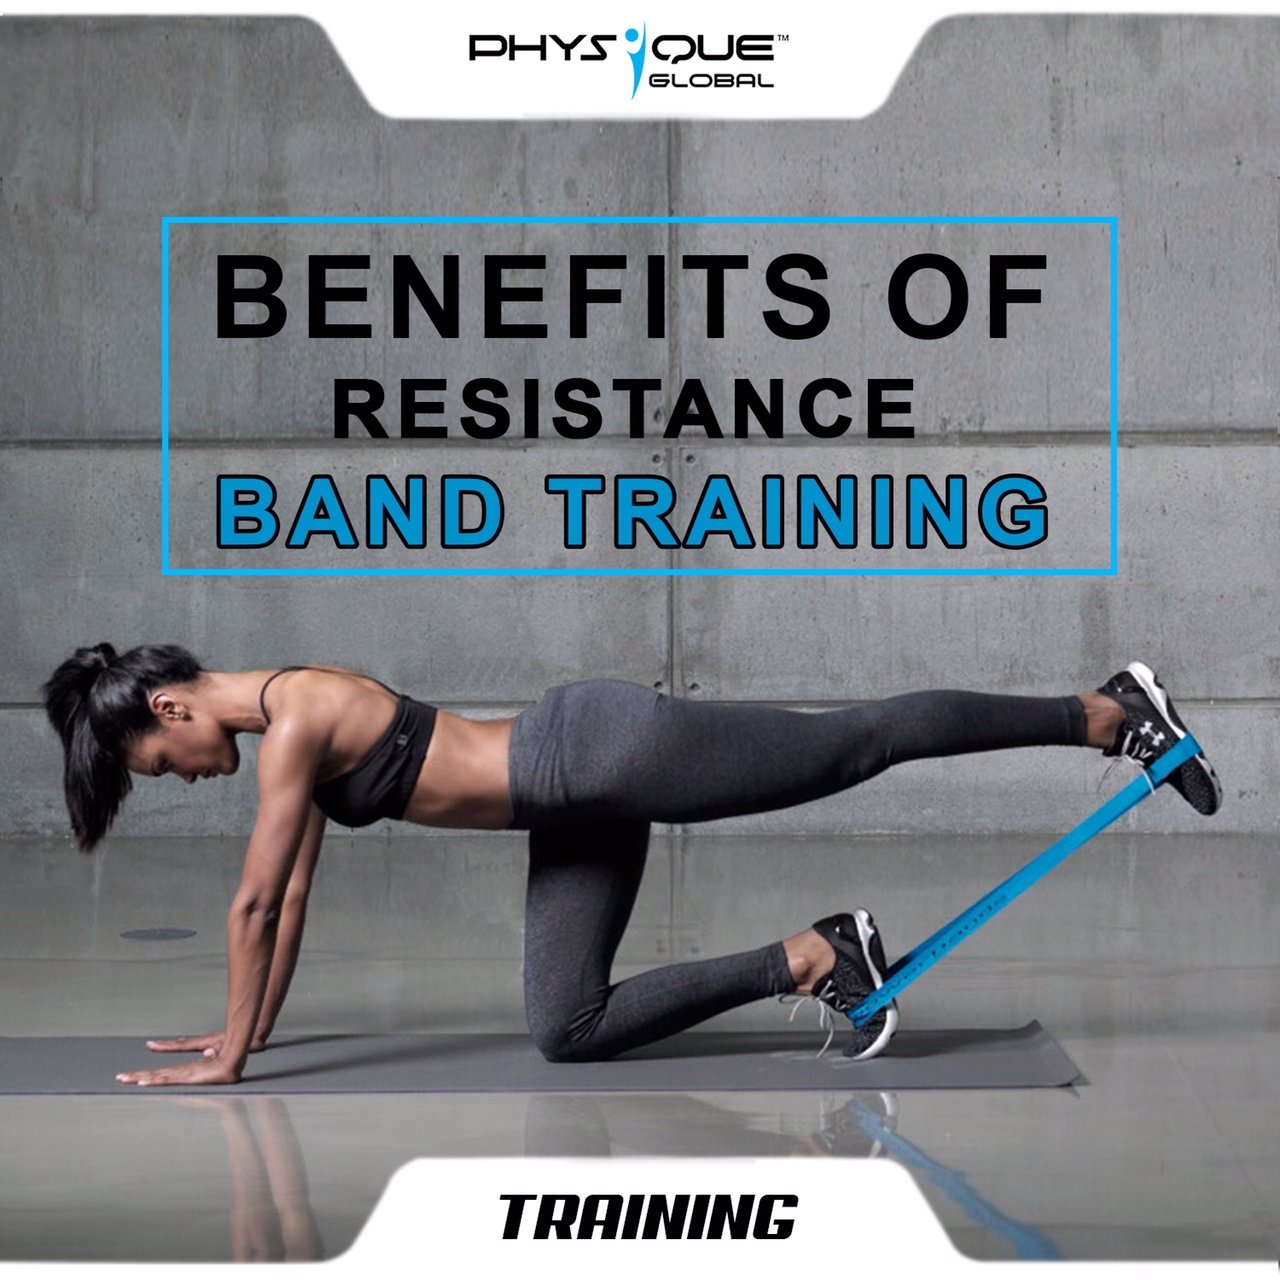 The option was exercised. Benefits of Resistance Band. Resistance Band Training. Resistance Band Workout. Benefits of Resistance Training.